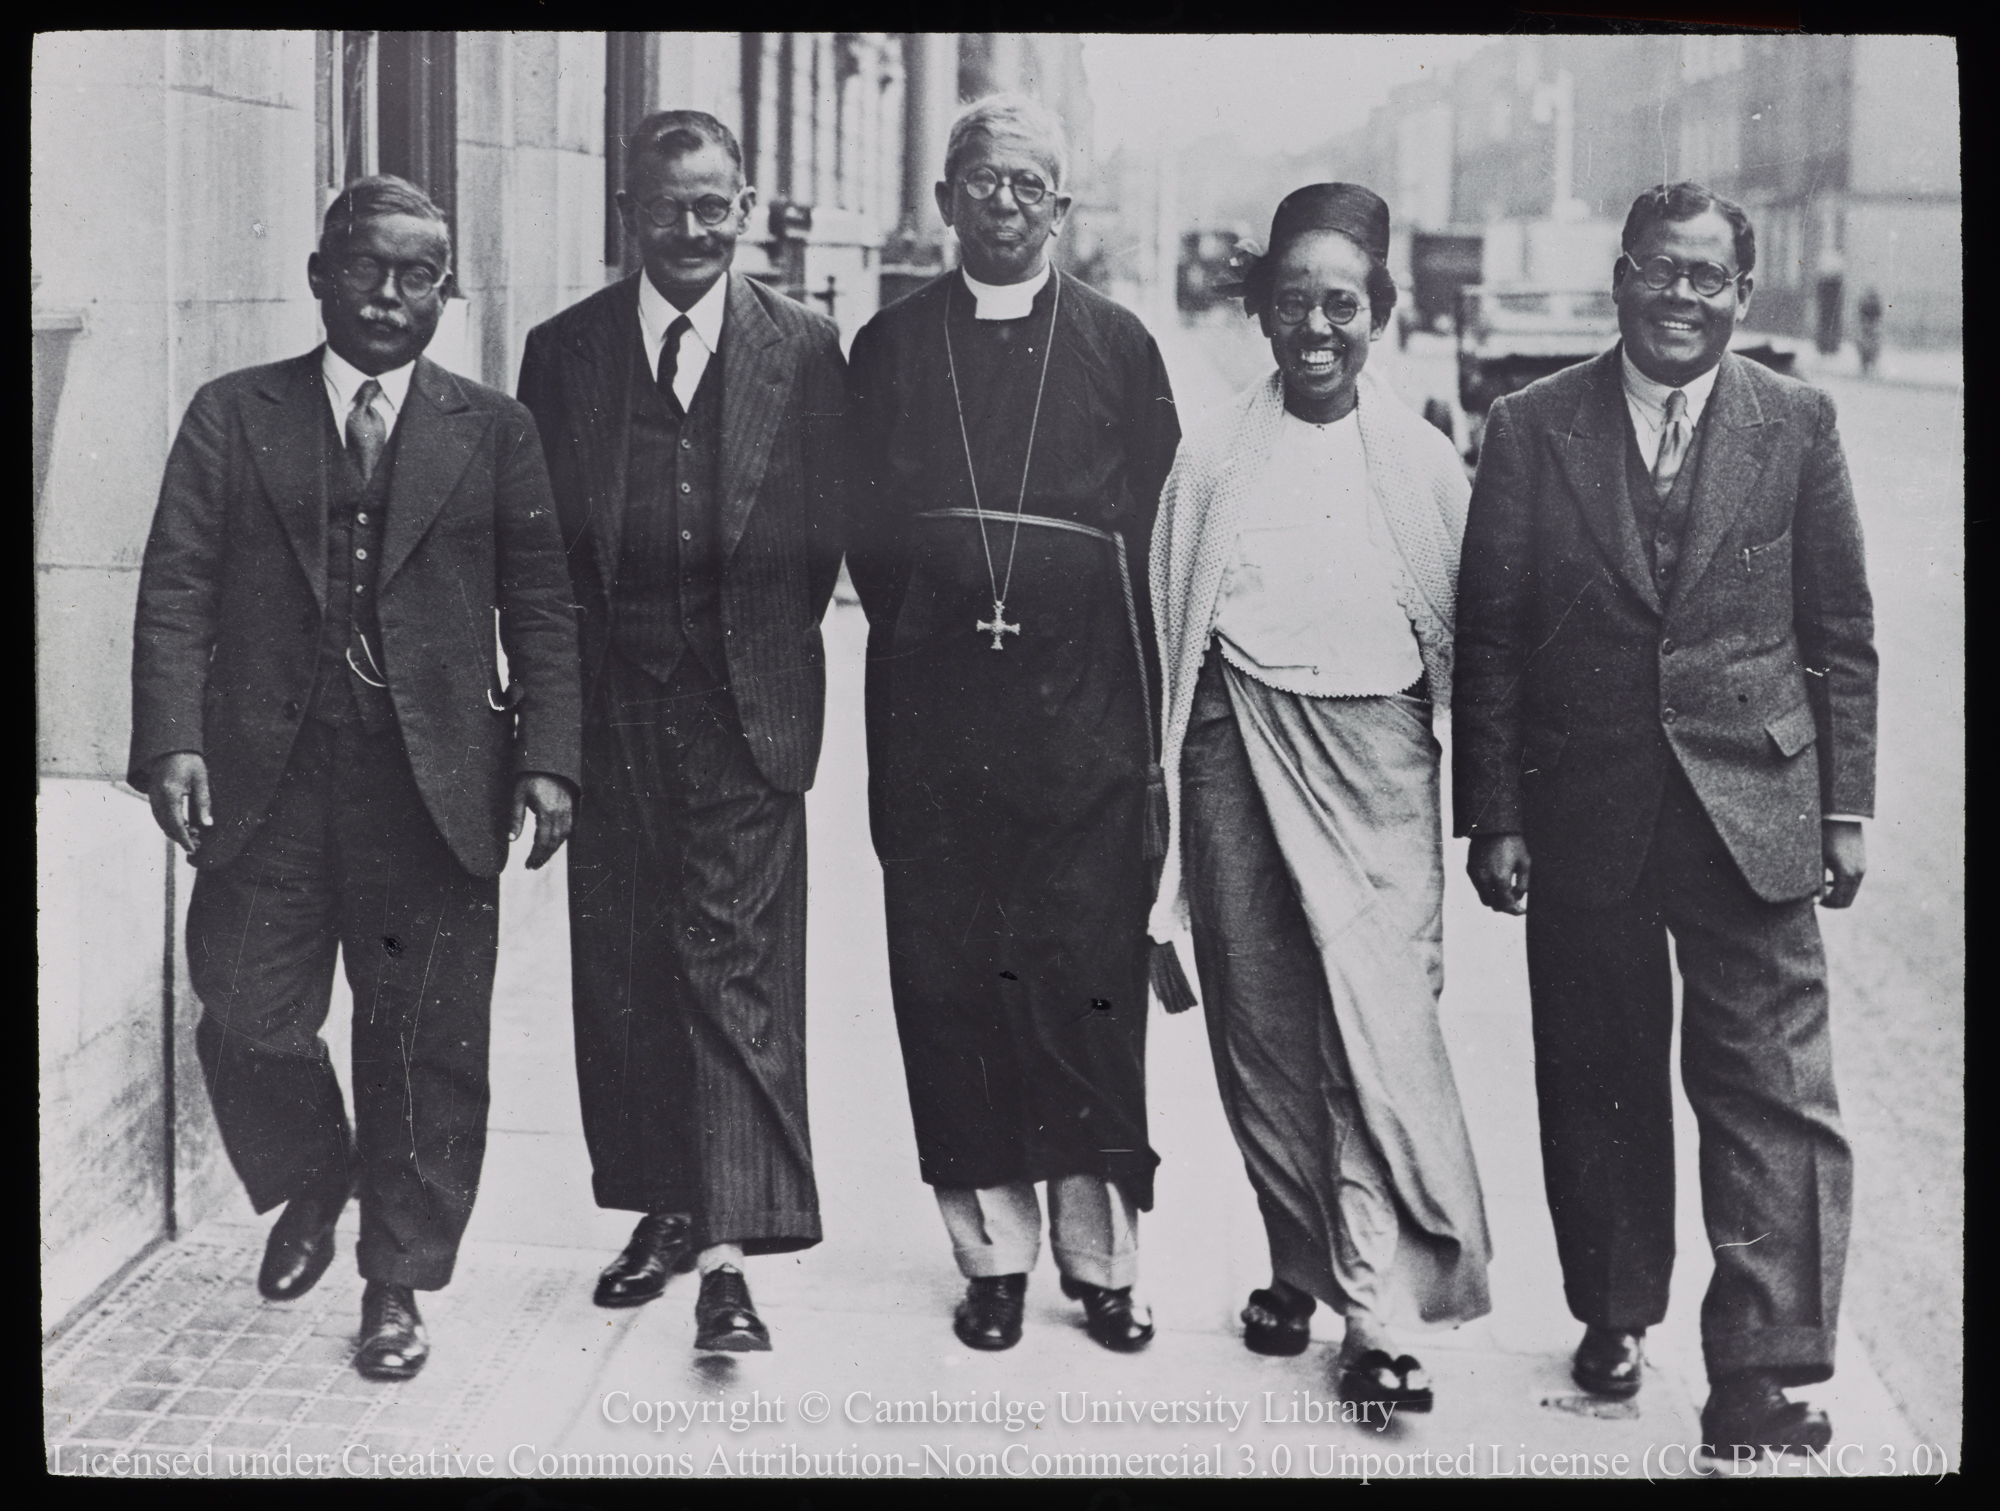 Rt. Rev. J.S.C. Bannerjee, appointed Assistant Bishop, Lahore, in 1931, with colleagues, 1931